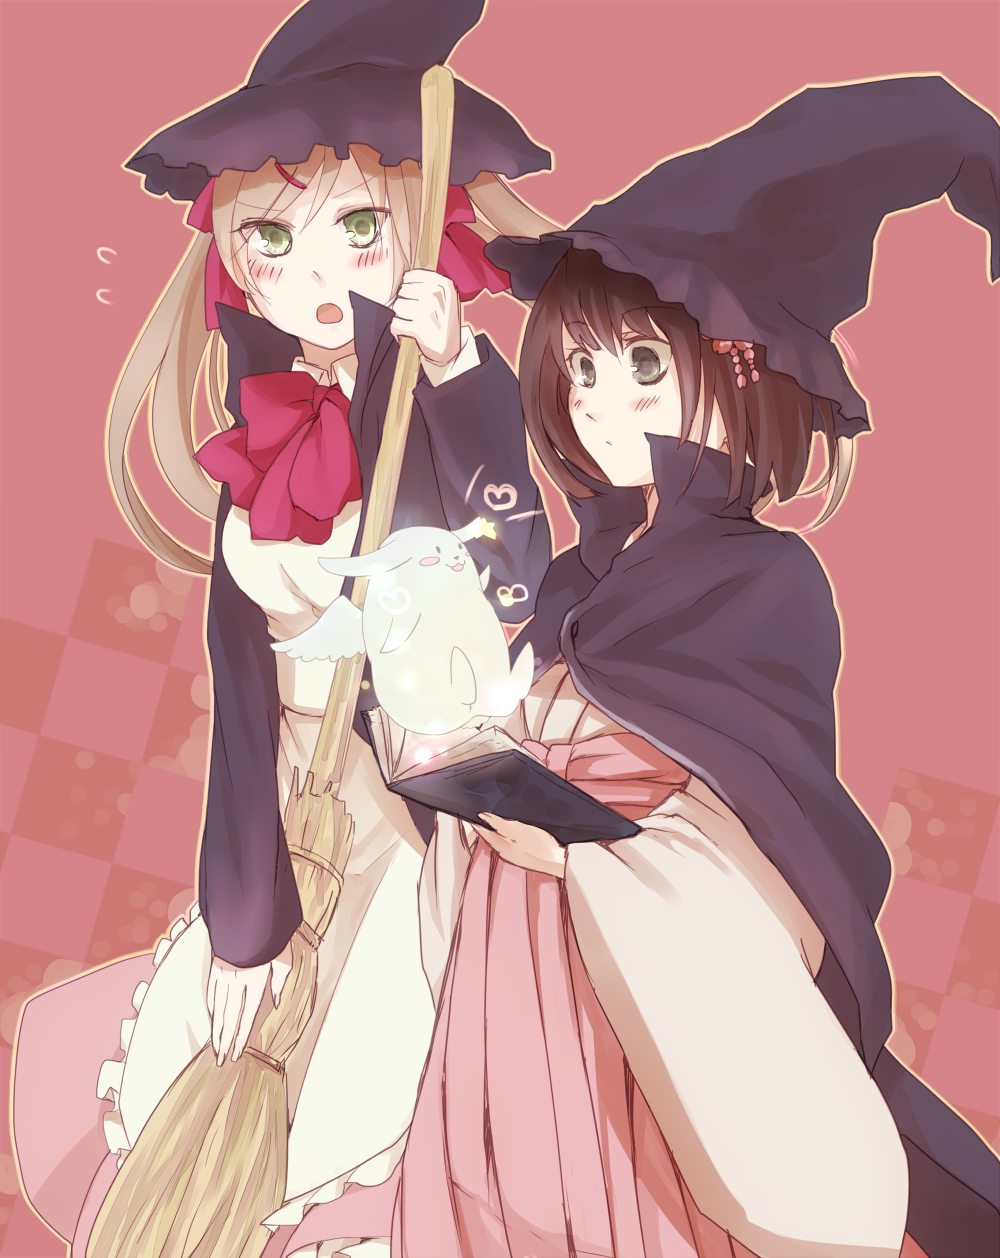 2girls :3 apron axis_powers_hetalia bangs black_eyes blonde_hair blunt_bangs blush blush_stickers book broom brown_hair buttons cape checkered creature dress flying_sweatdrops genderswap green_eyes grey_eyes hair_ornament hat heart highres holding japan_(hetalia) japanese_clothes multiple_girls open_mouth pink_background pink_dress ribbon sumaki twintails united_kingdom_(hetalia) wings witch_hat